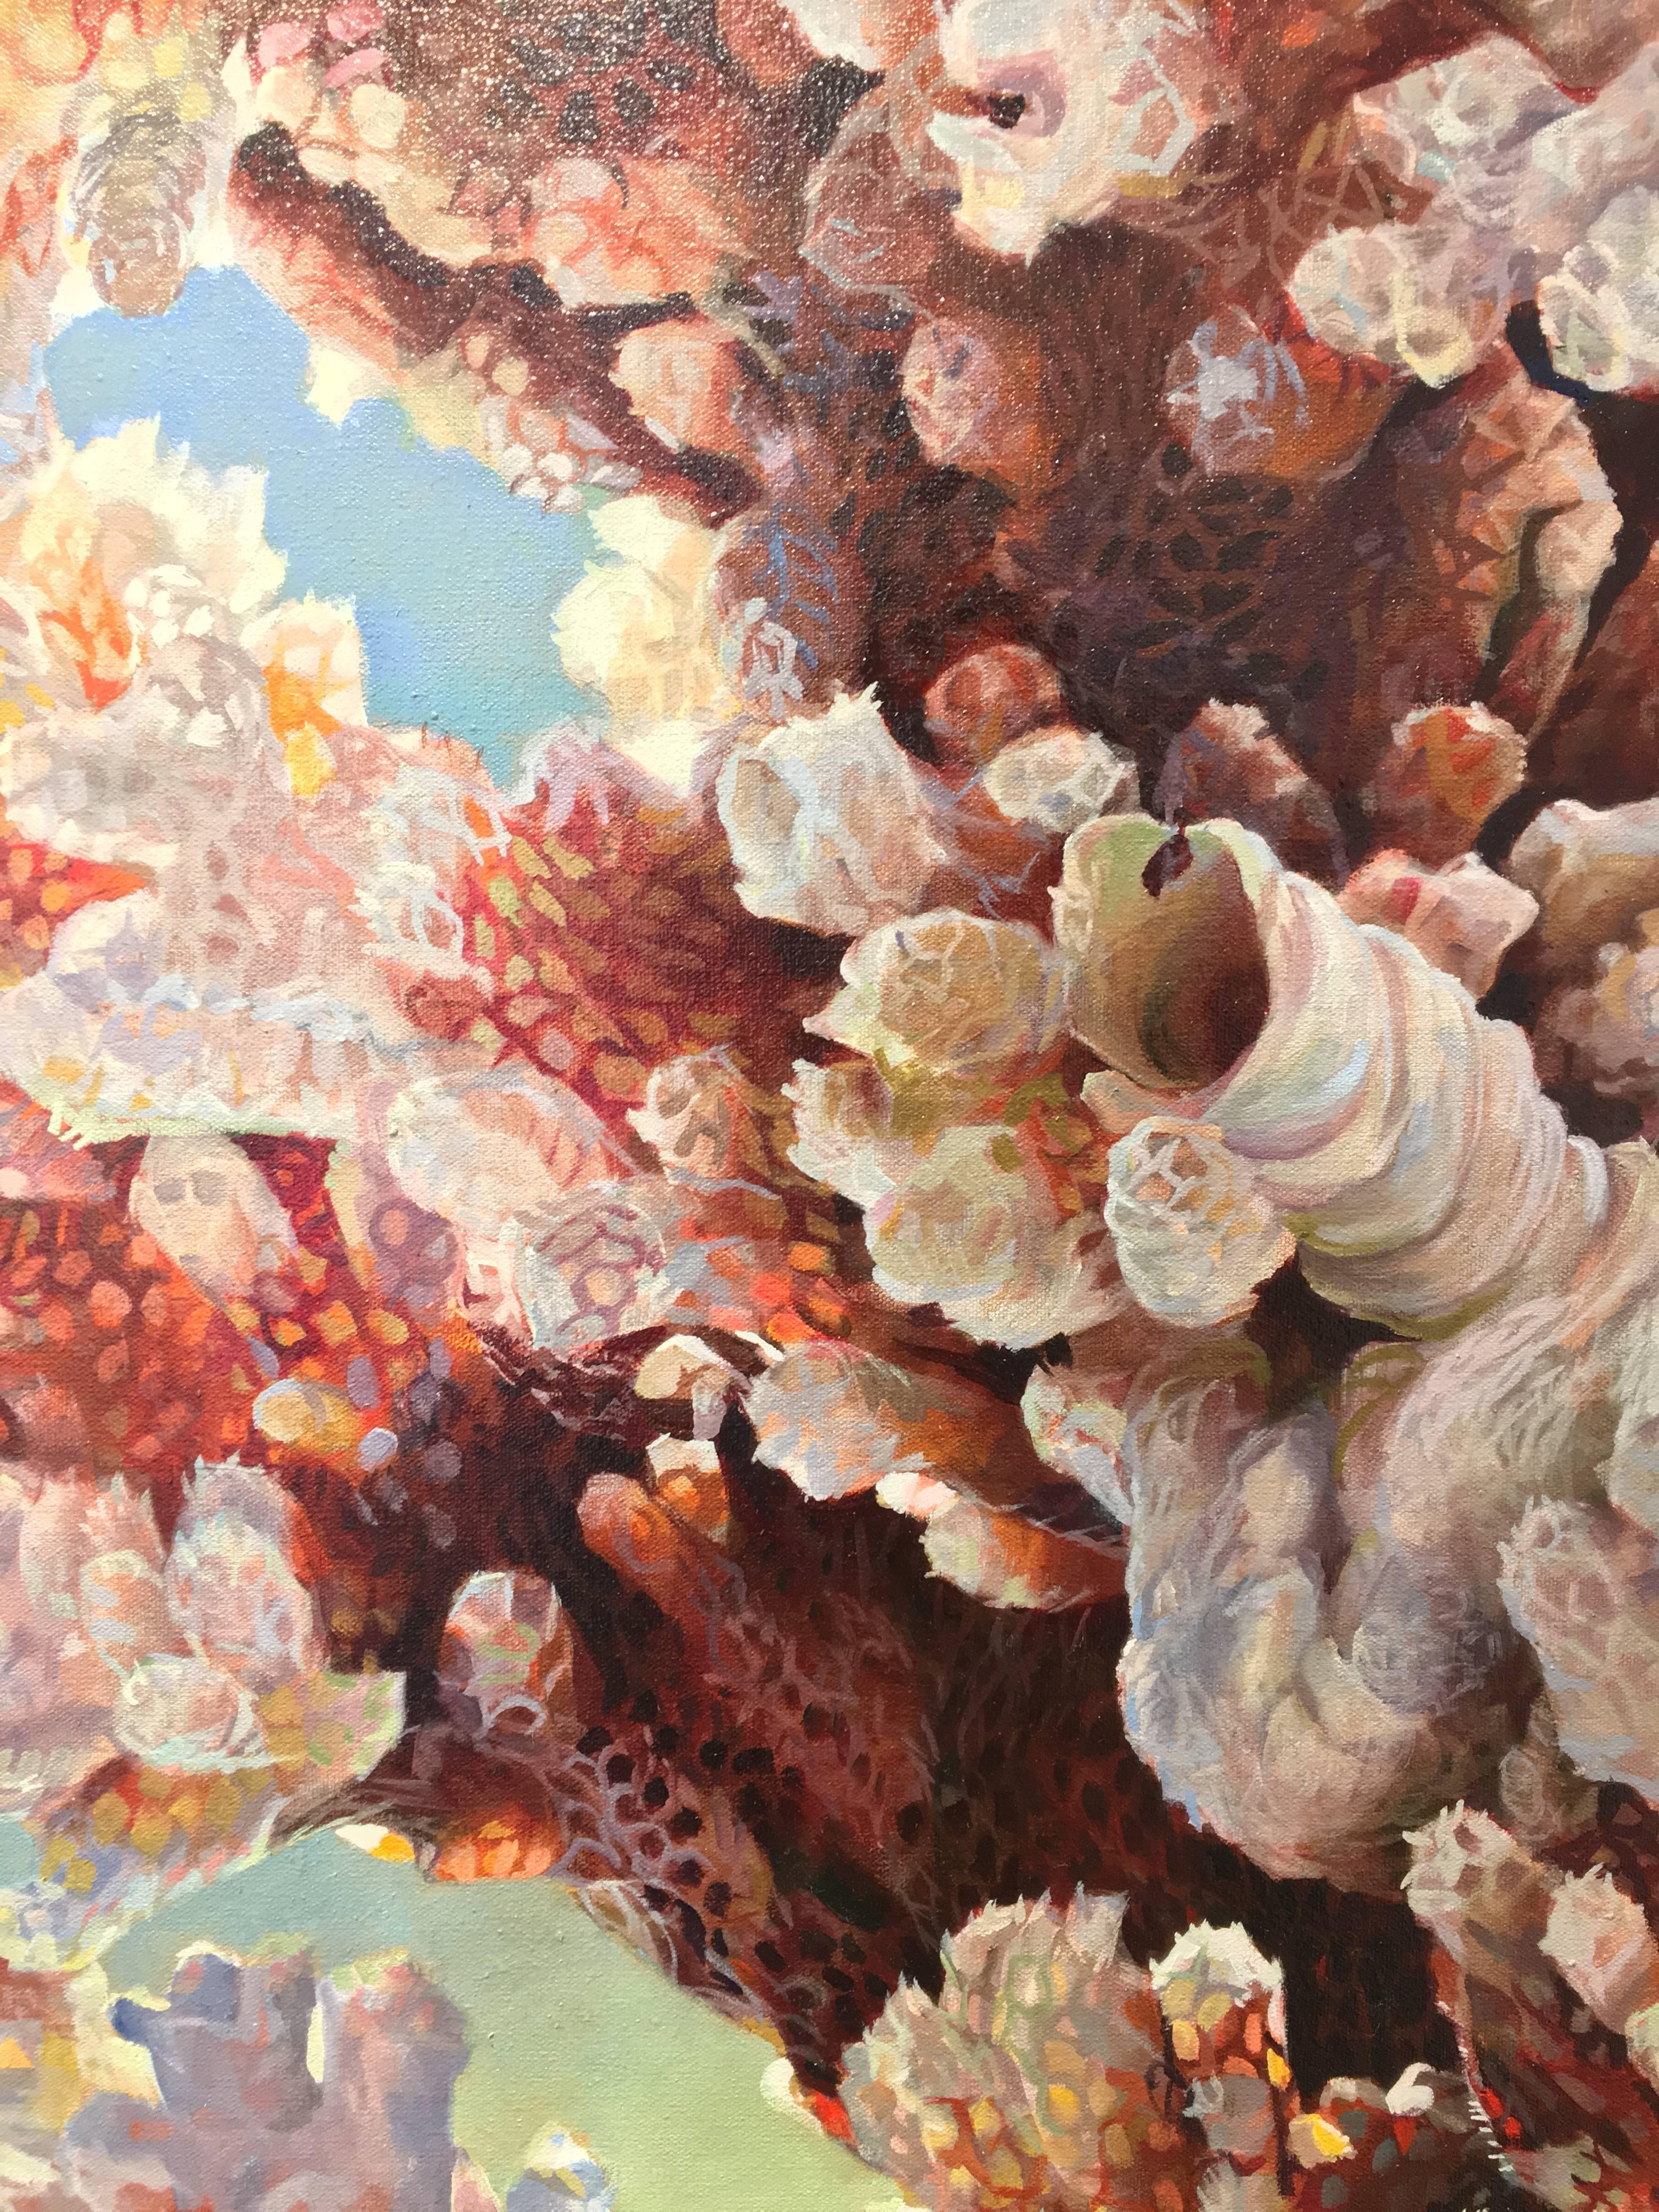 Serpulae Occultatum, Coral Still Life in Earthy White, Red, on Pale Green Blue - Gray Still-Life Painting by Andrea Kantrowitz